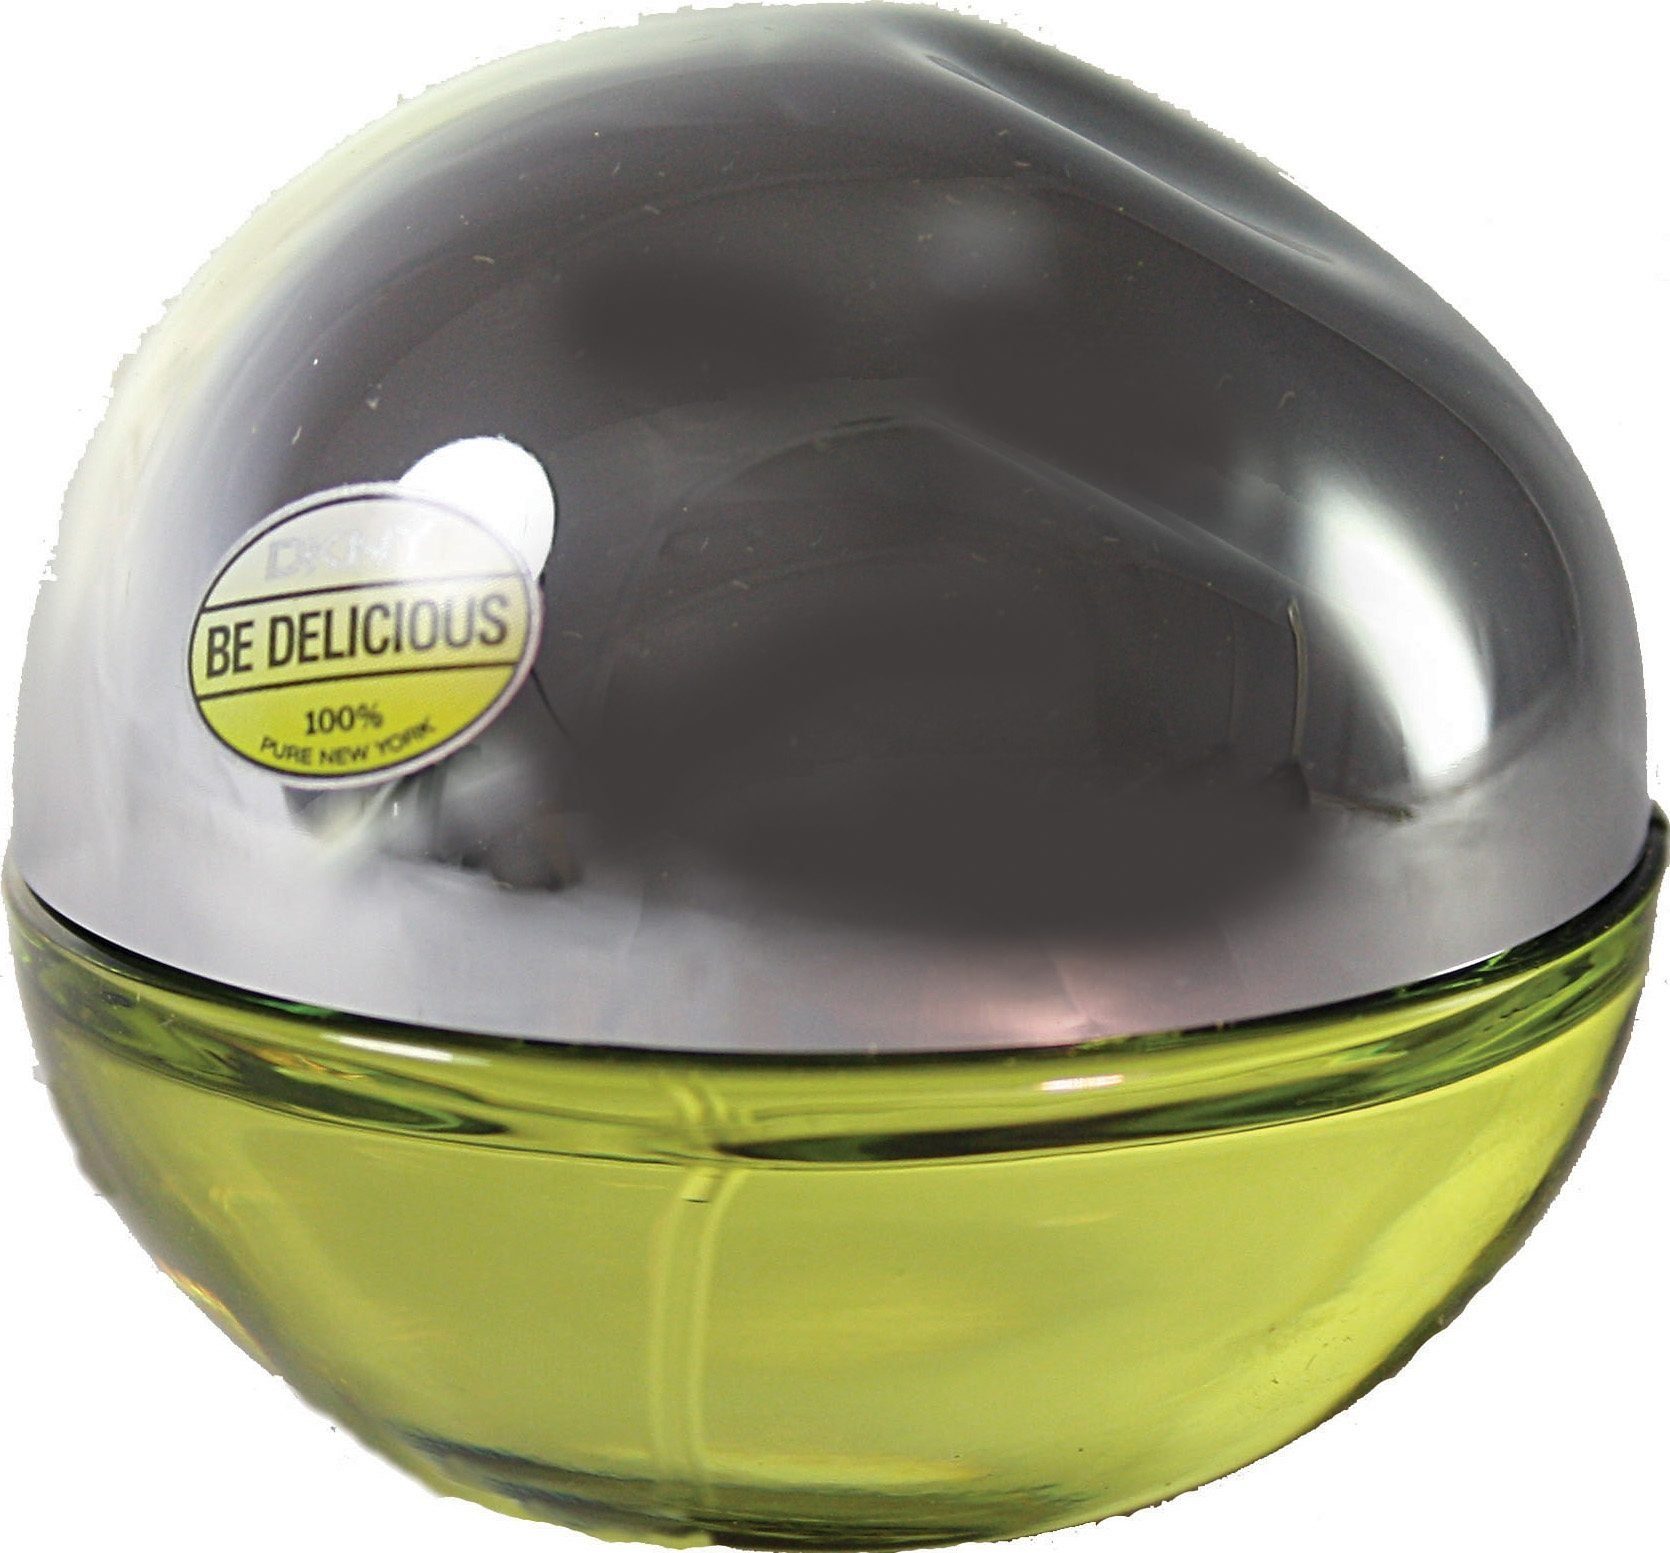 DKNY Парфюми Be Delicious, EdP for her, Parfum, fruchtiges Aroma